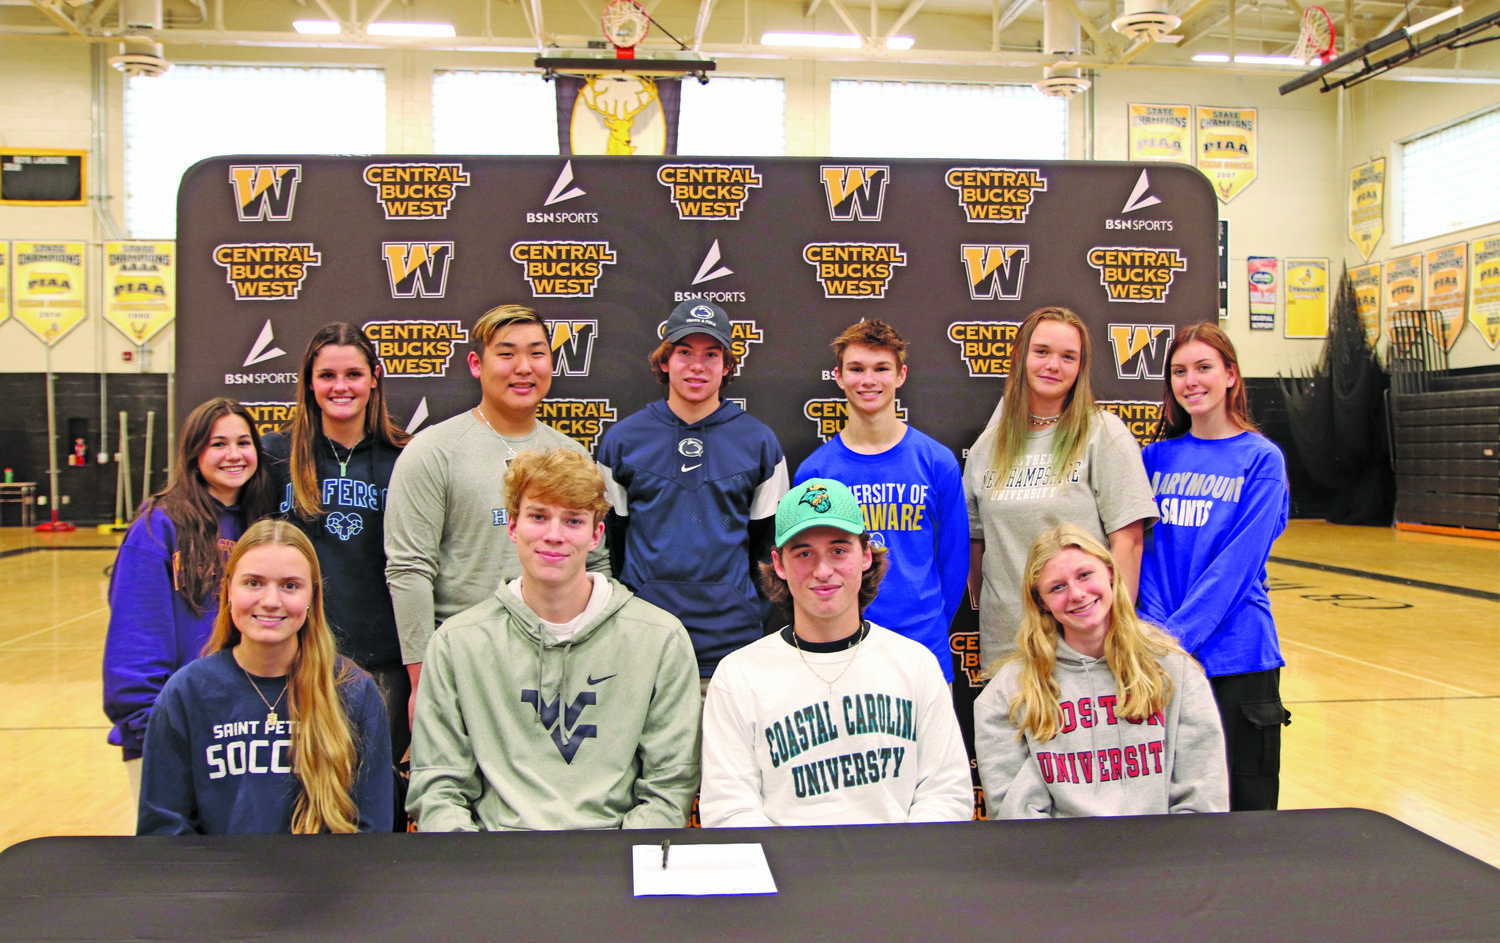 Central Bucks West seniors who were recently recognized for committing to compete in collegiate sports are, from left, front row, Taylor Moyer, Cole Fehrman, Aidan Quinn, Kate Edenson; back row, Bella Aulisio, Emily Spratt, Aiden Kim, Carter Fitzgerald, Kevin Siegfried, Abby Lineman and Bailey Demusz.